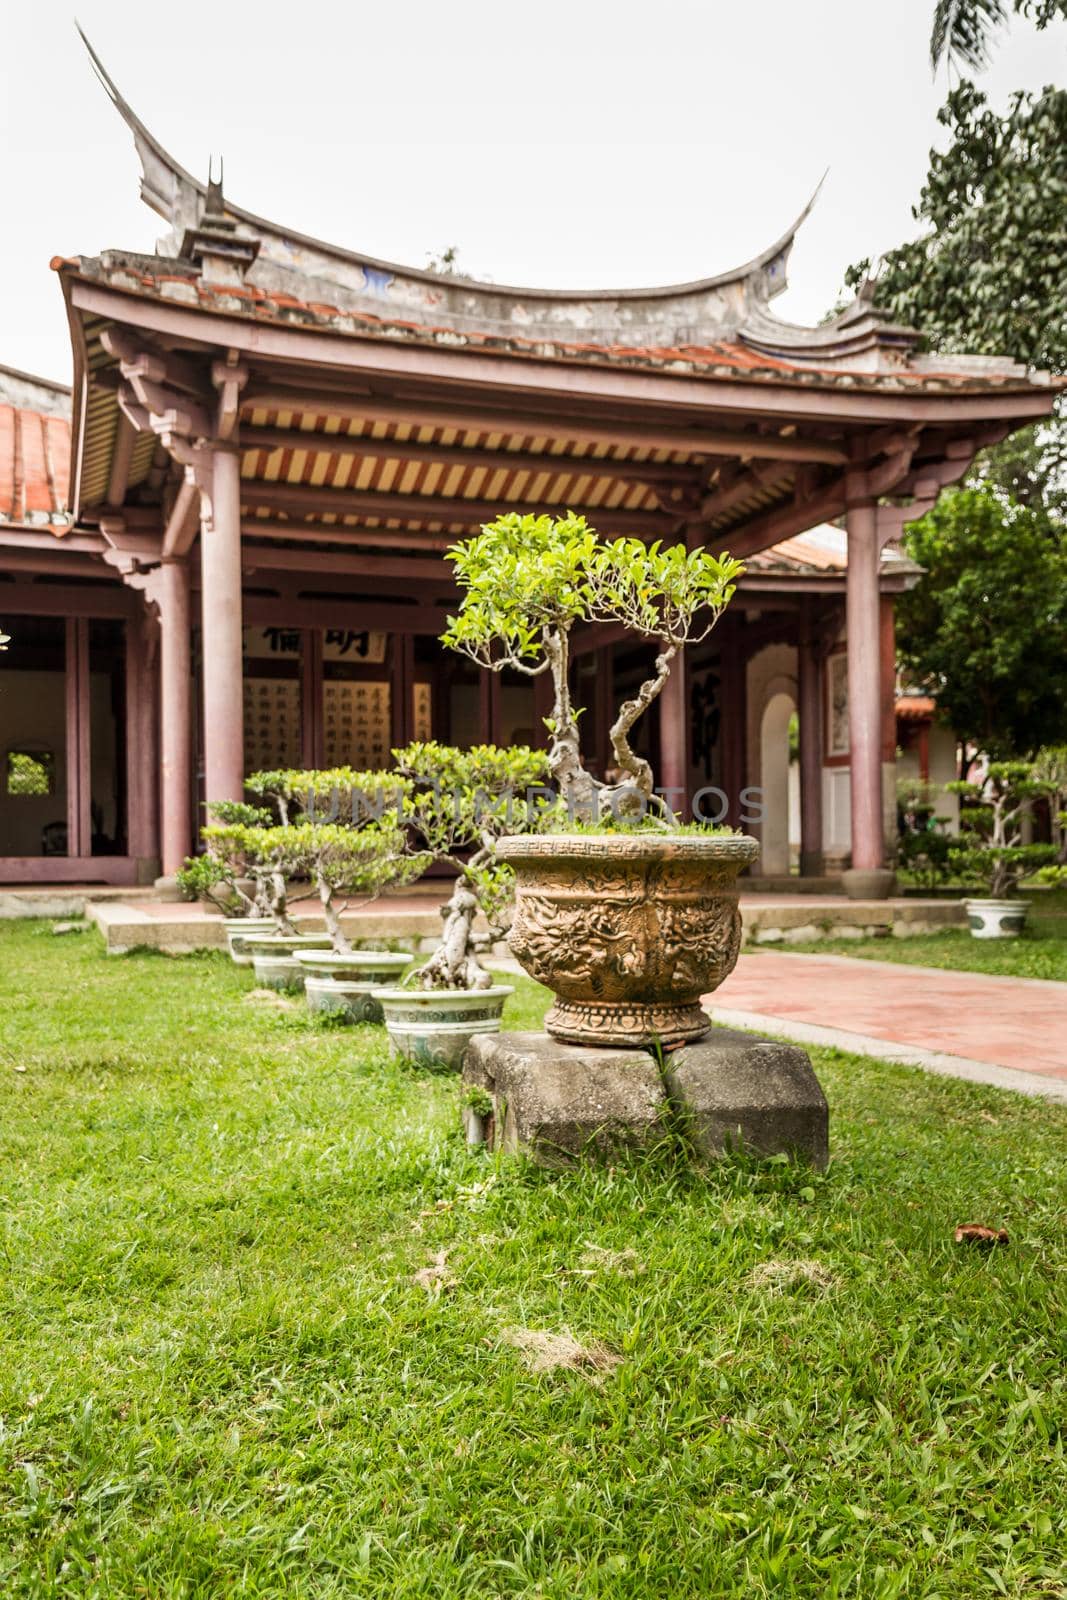 Row of bonsai trees outside temple by imagesbykenny